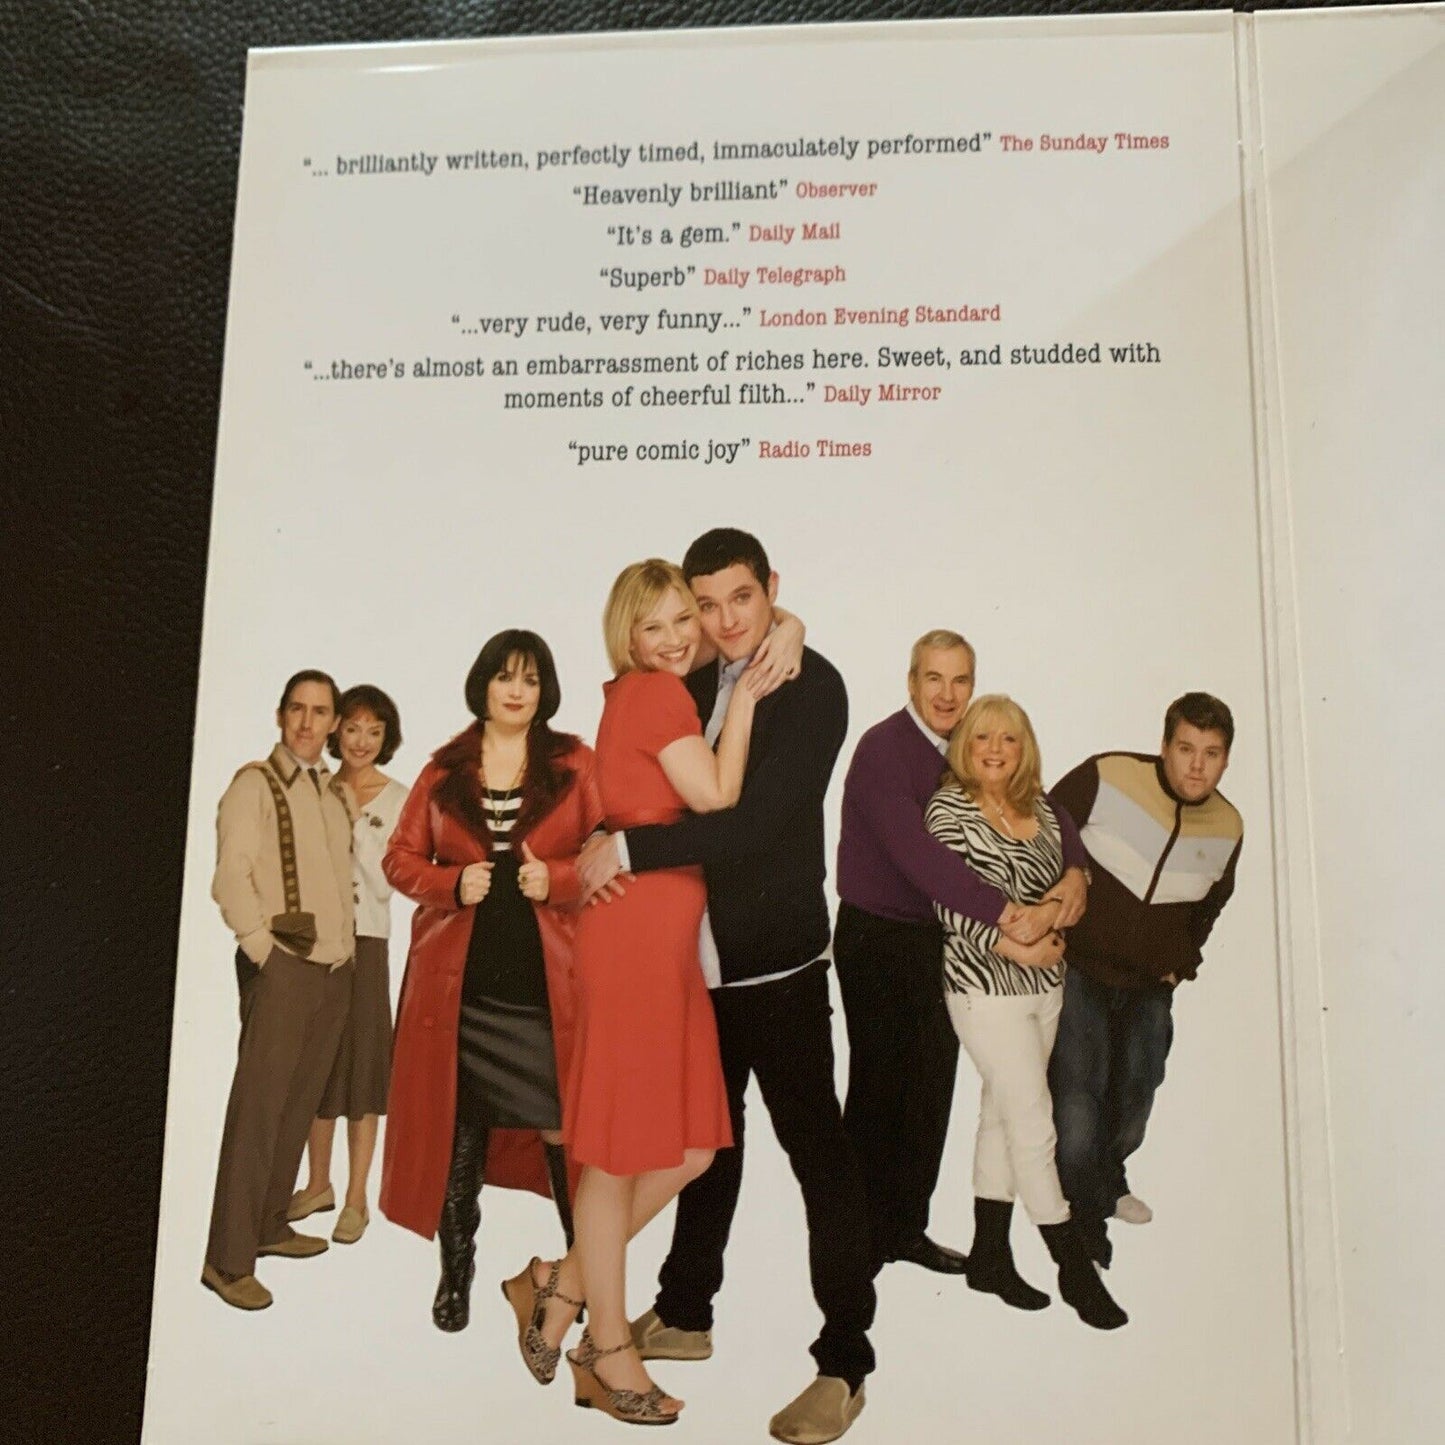 Gavin and Stacey: The Complete Collection (DVD, 2009, 6-Disc Set) BBC Region 4,2